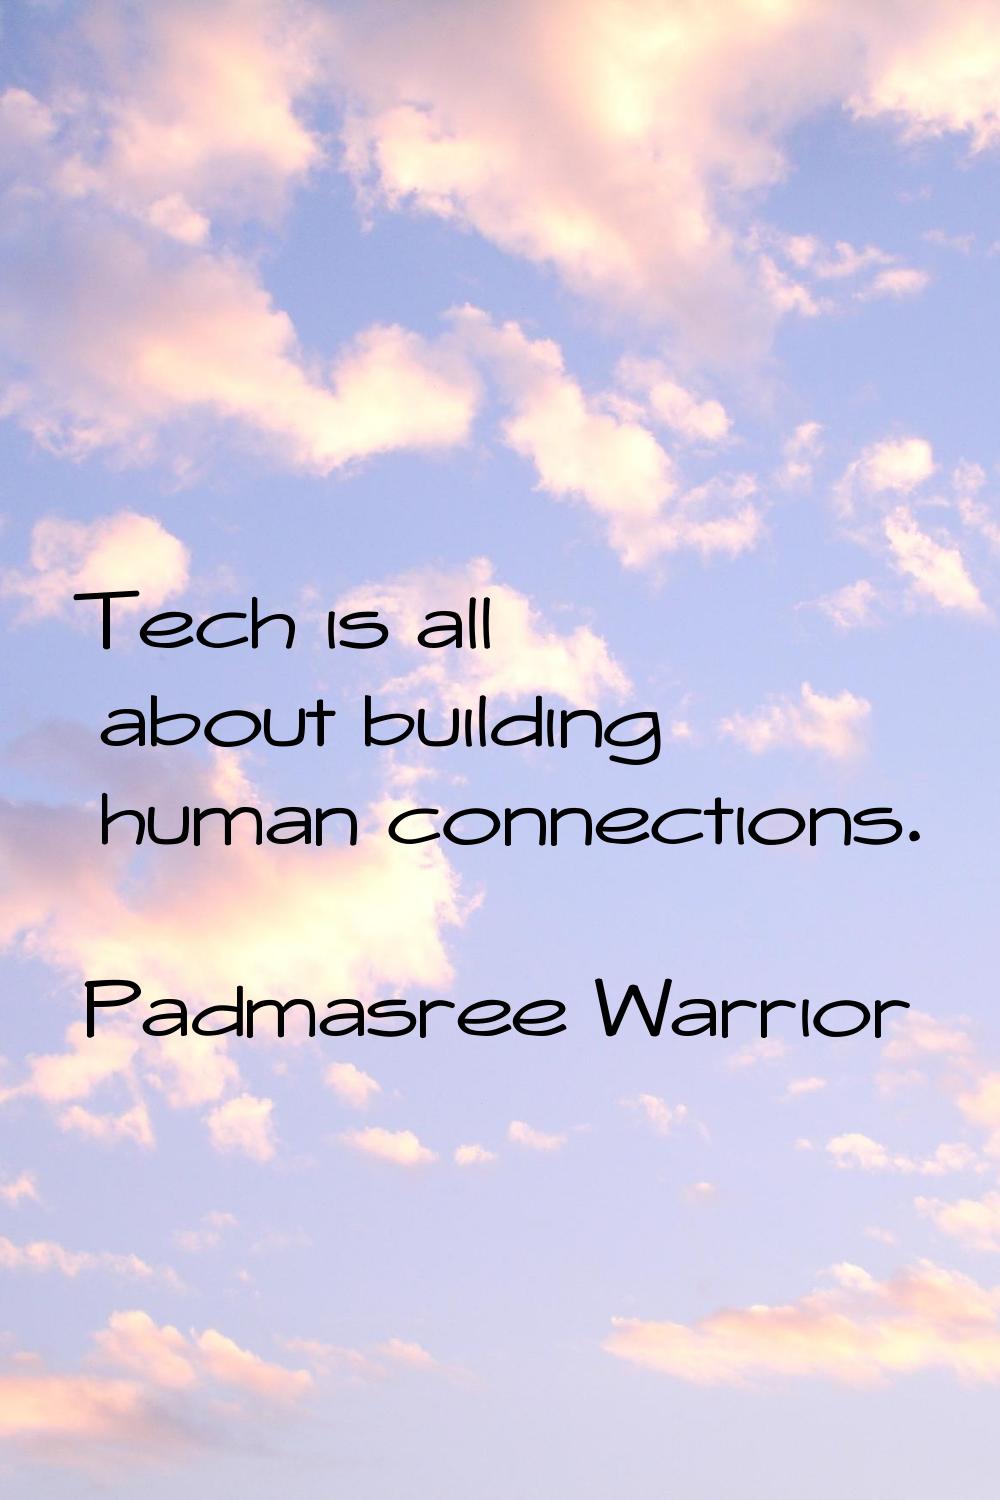 Tech is all about building human connections.